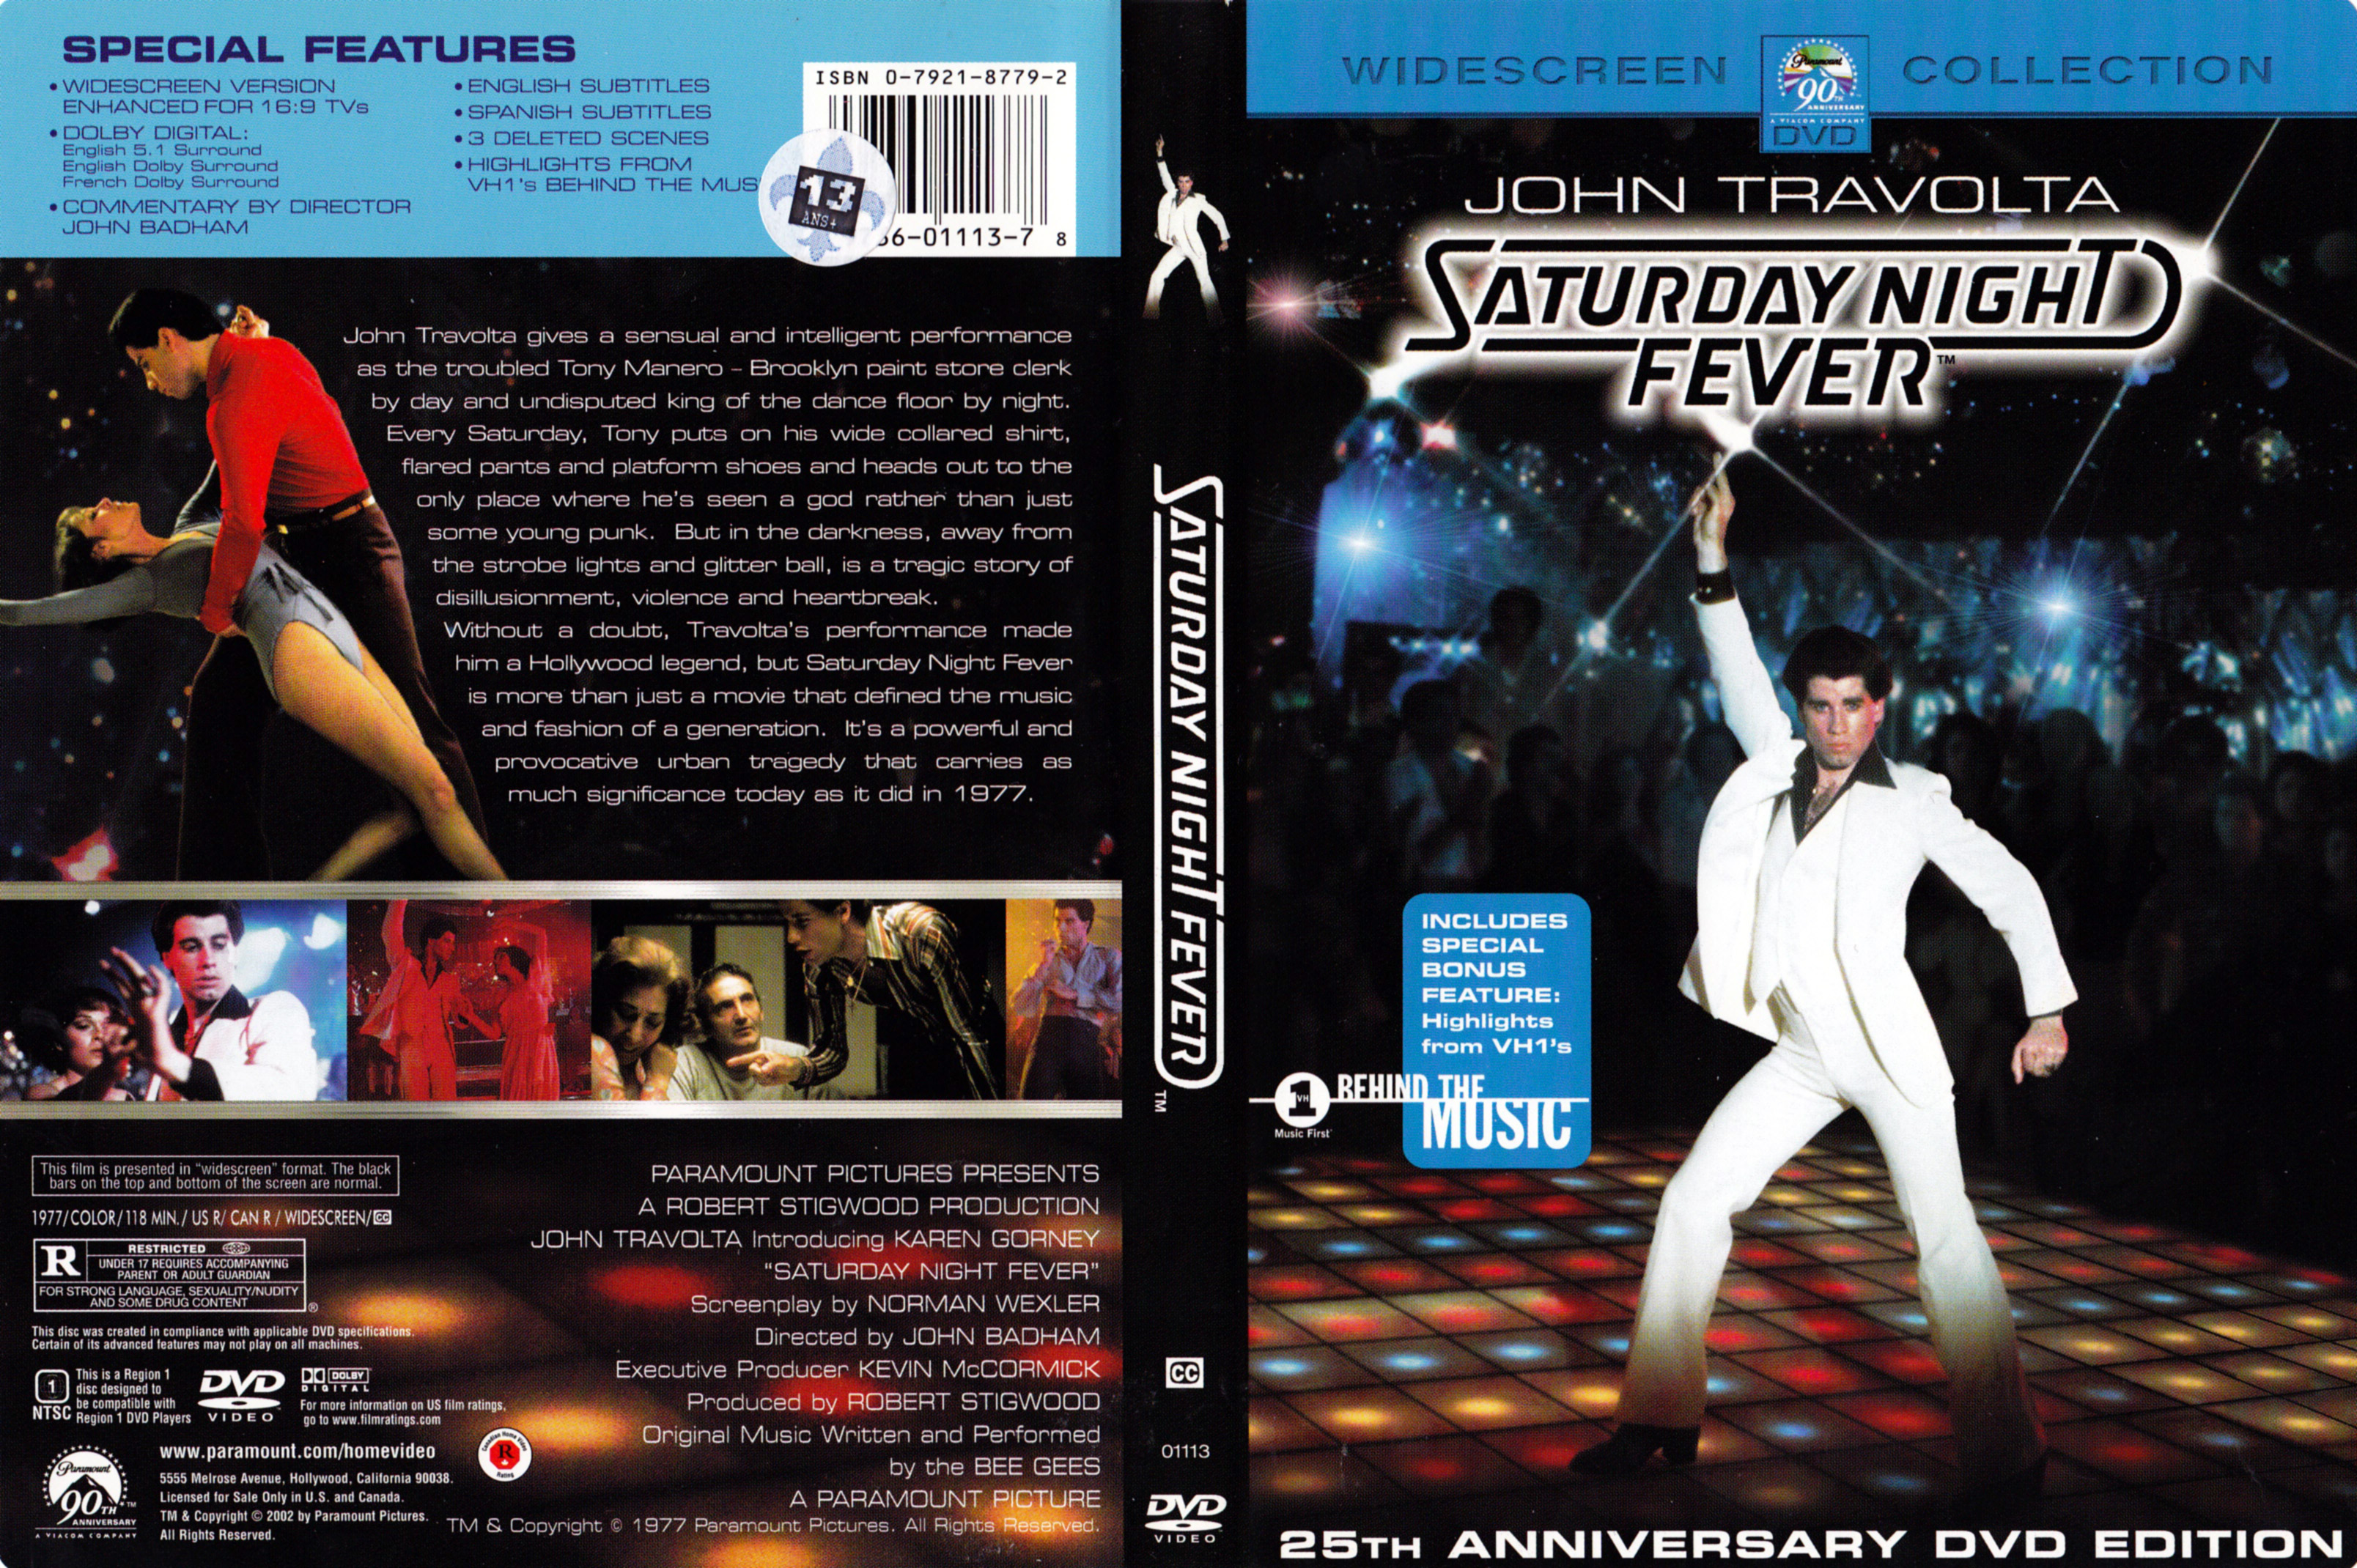 Jaquette DVD Saturday night fever (Canadienne)